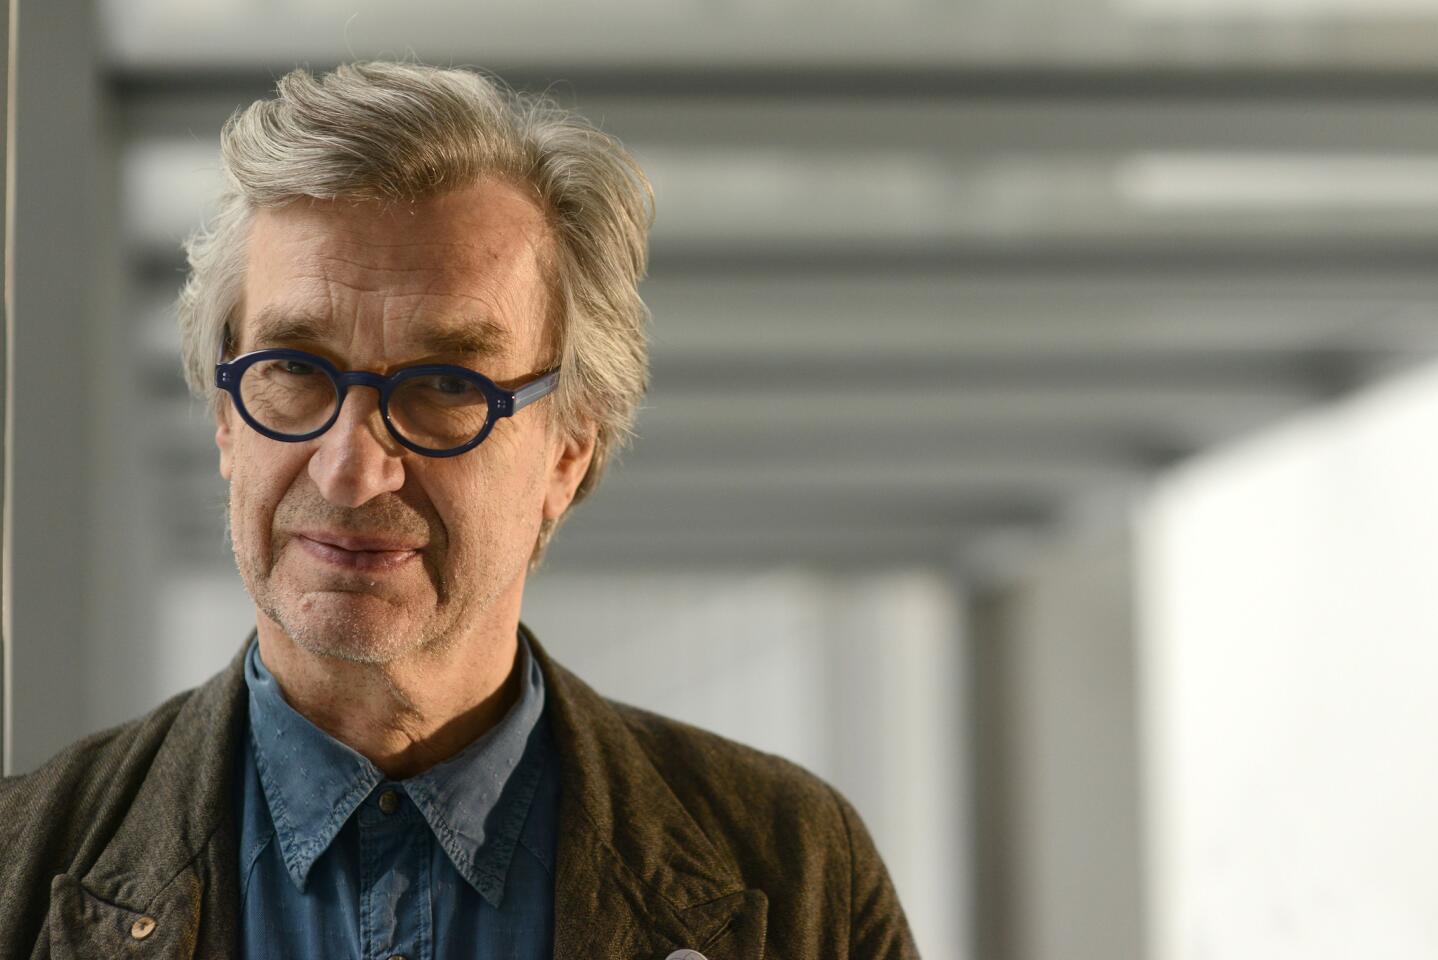 German director Wim Wenders has had a prolific career, making films both famous and obscure. Along the way, he's picked up three Oscar nominations for feature documentary. Here's a brief sampling of his more storied work.